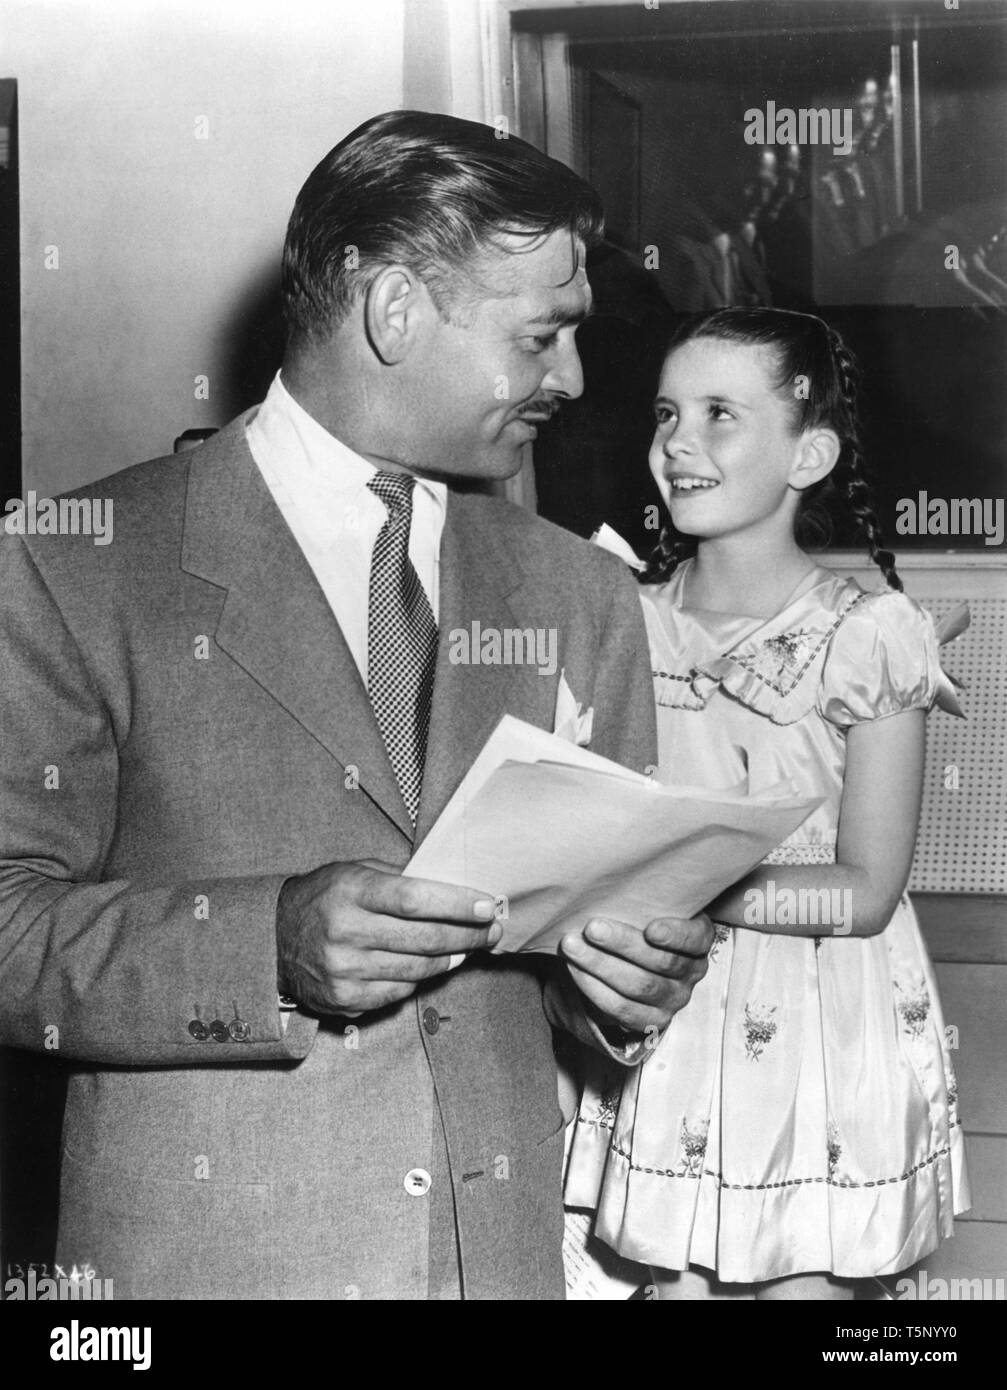 CLARK GABLE and MARGARET O'BRIEN candid on set ADVENTURE 1945 director Victor Fleming Metro Goldwyn Mayer Stock Photo